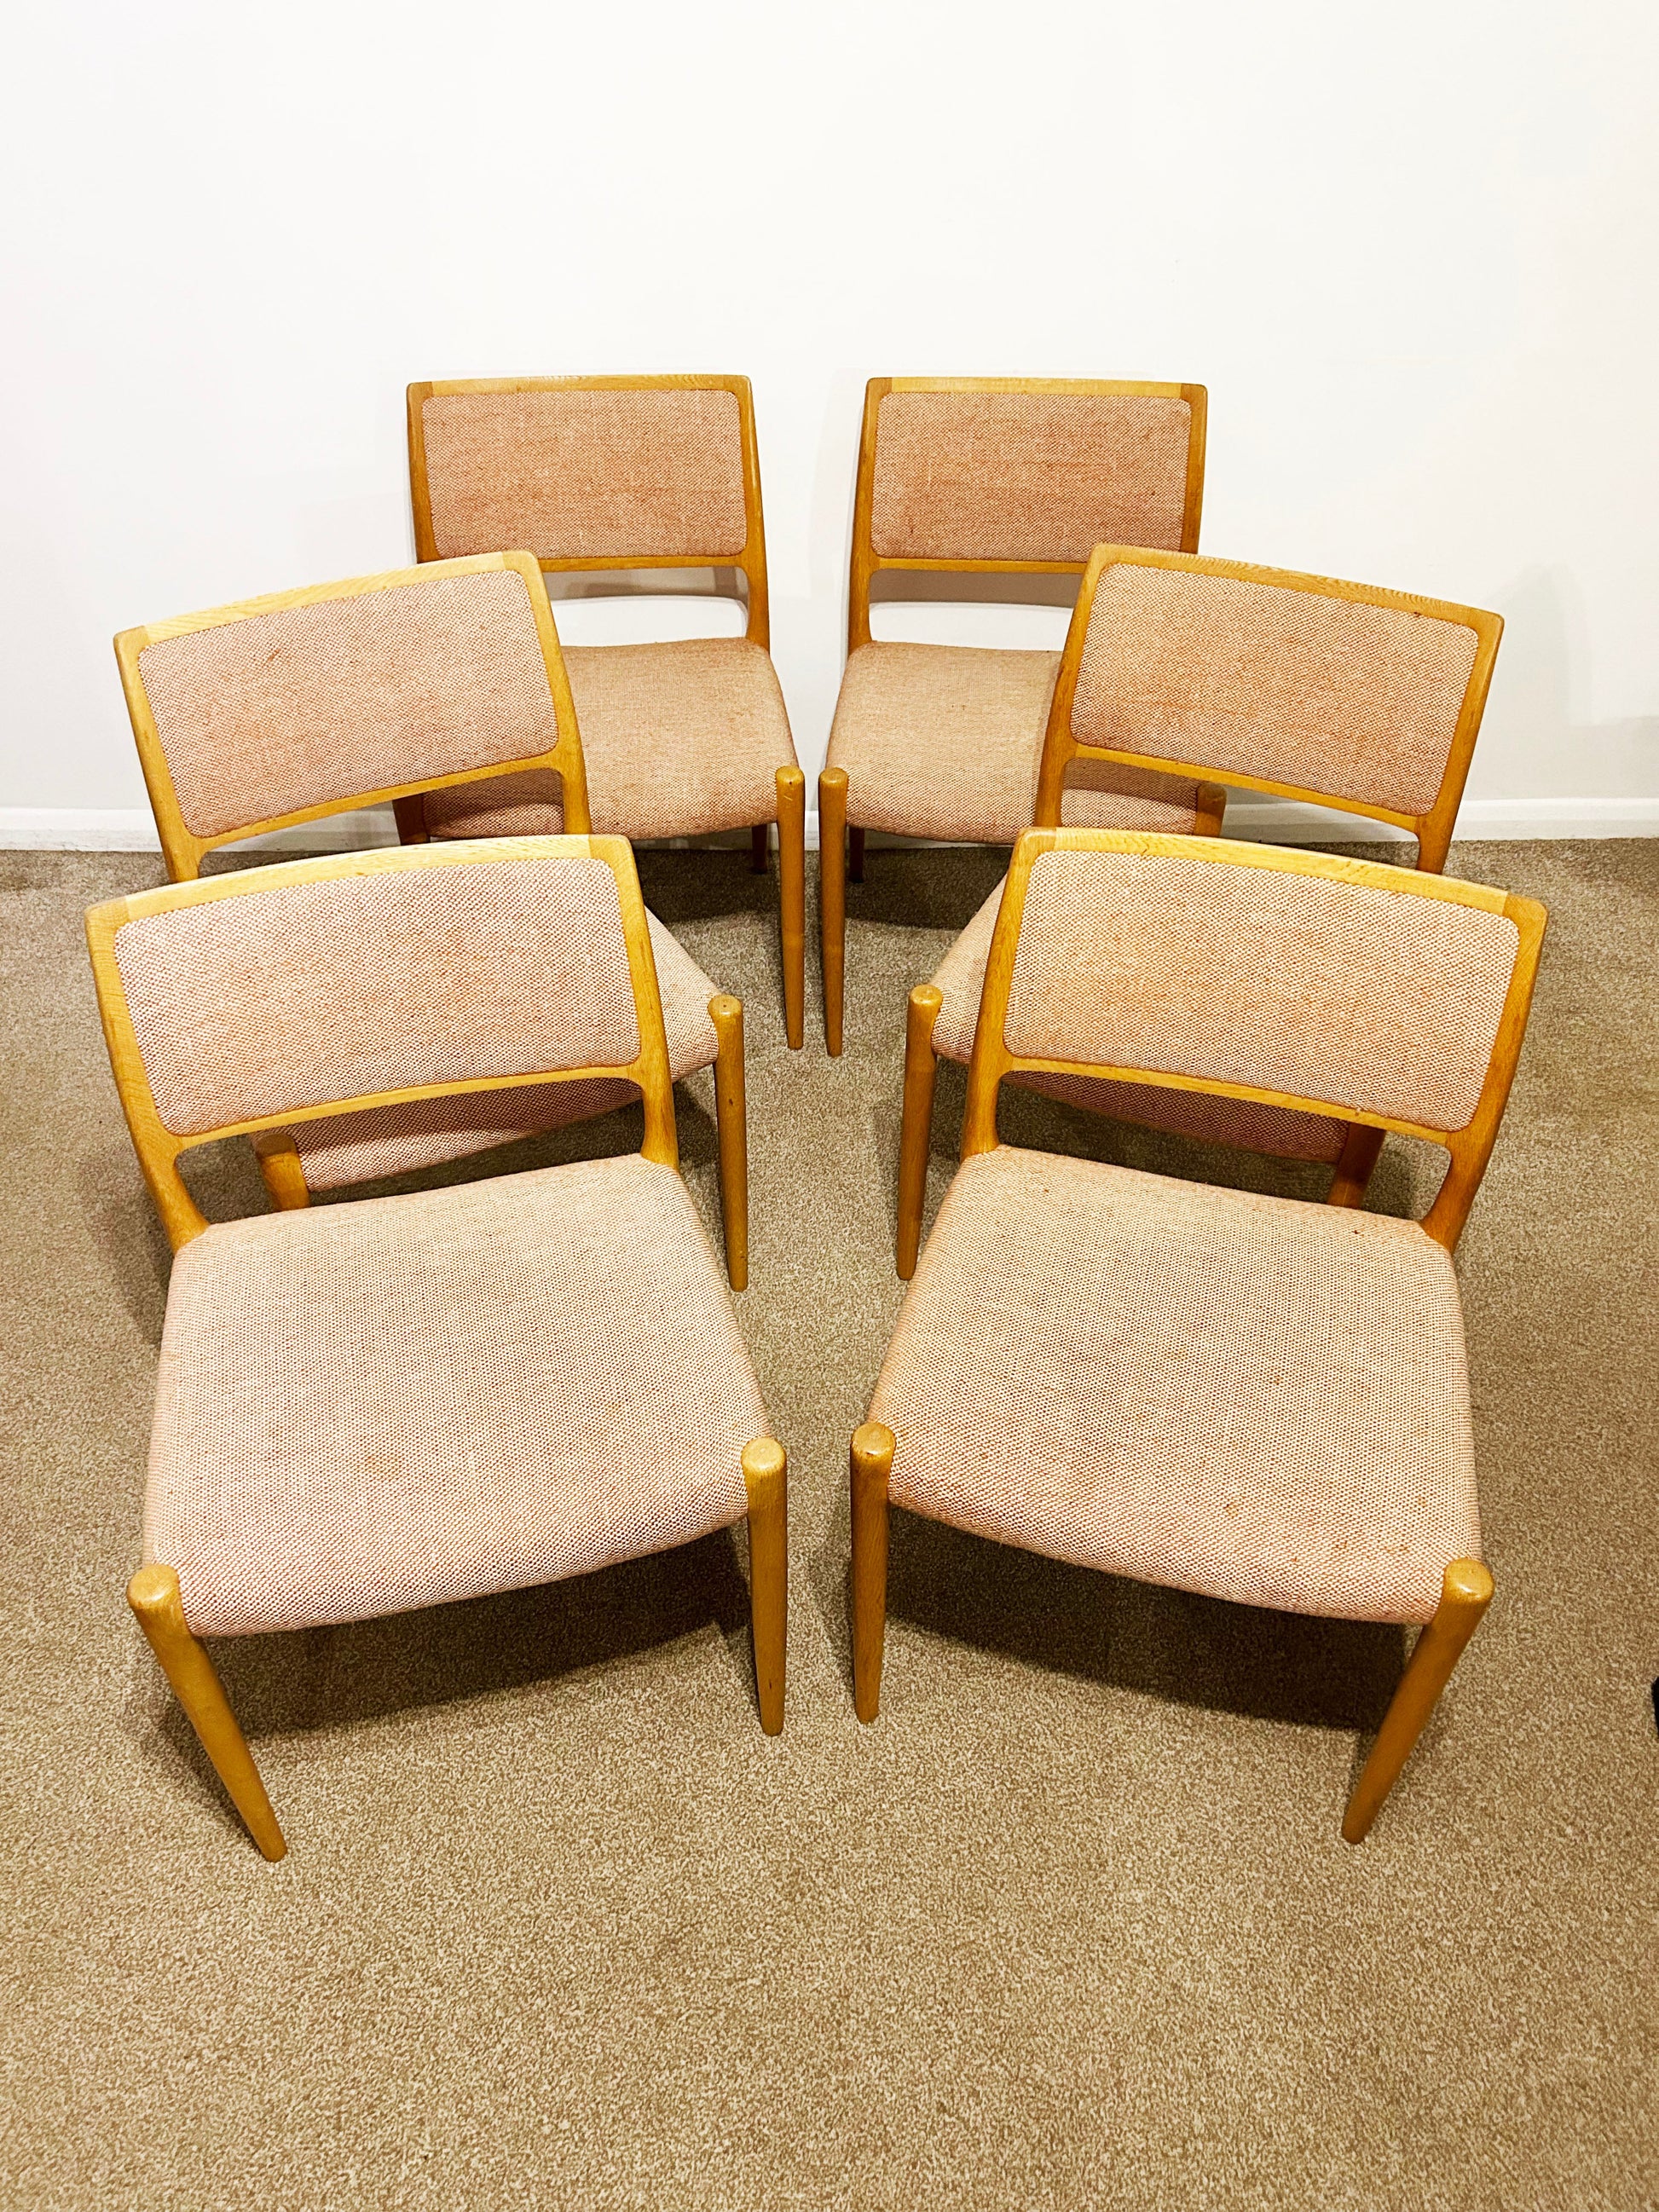 Niels Otto Moller Model 80 Set of Six Scandinavian Design Dining Chairs in Pink Fabric and Teak Frame, Denmark, 1960s. Marshall Walker Antique & Vintage Furniture